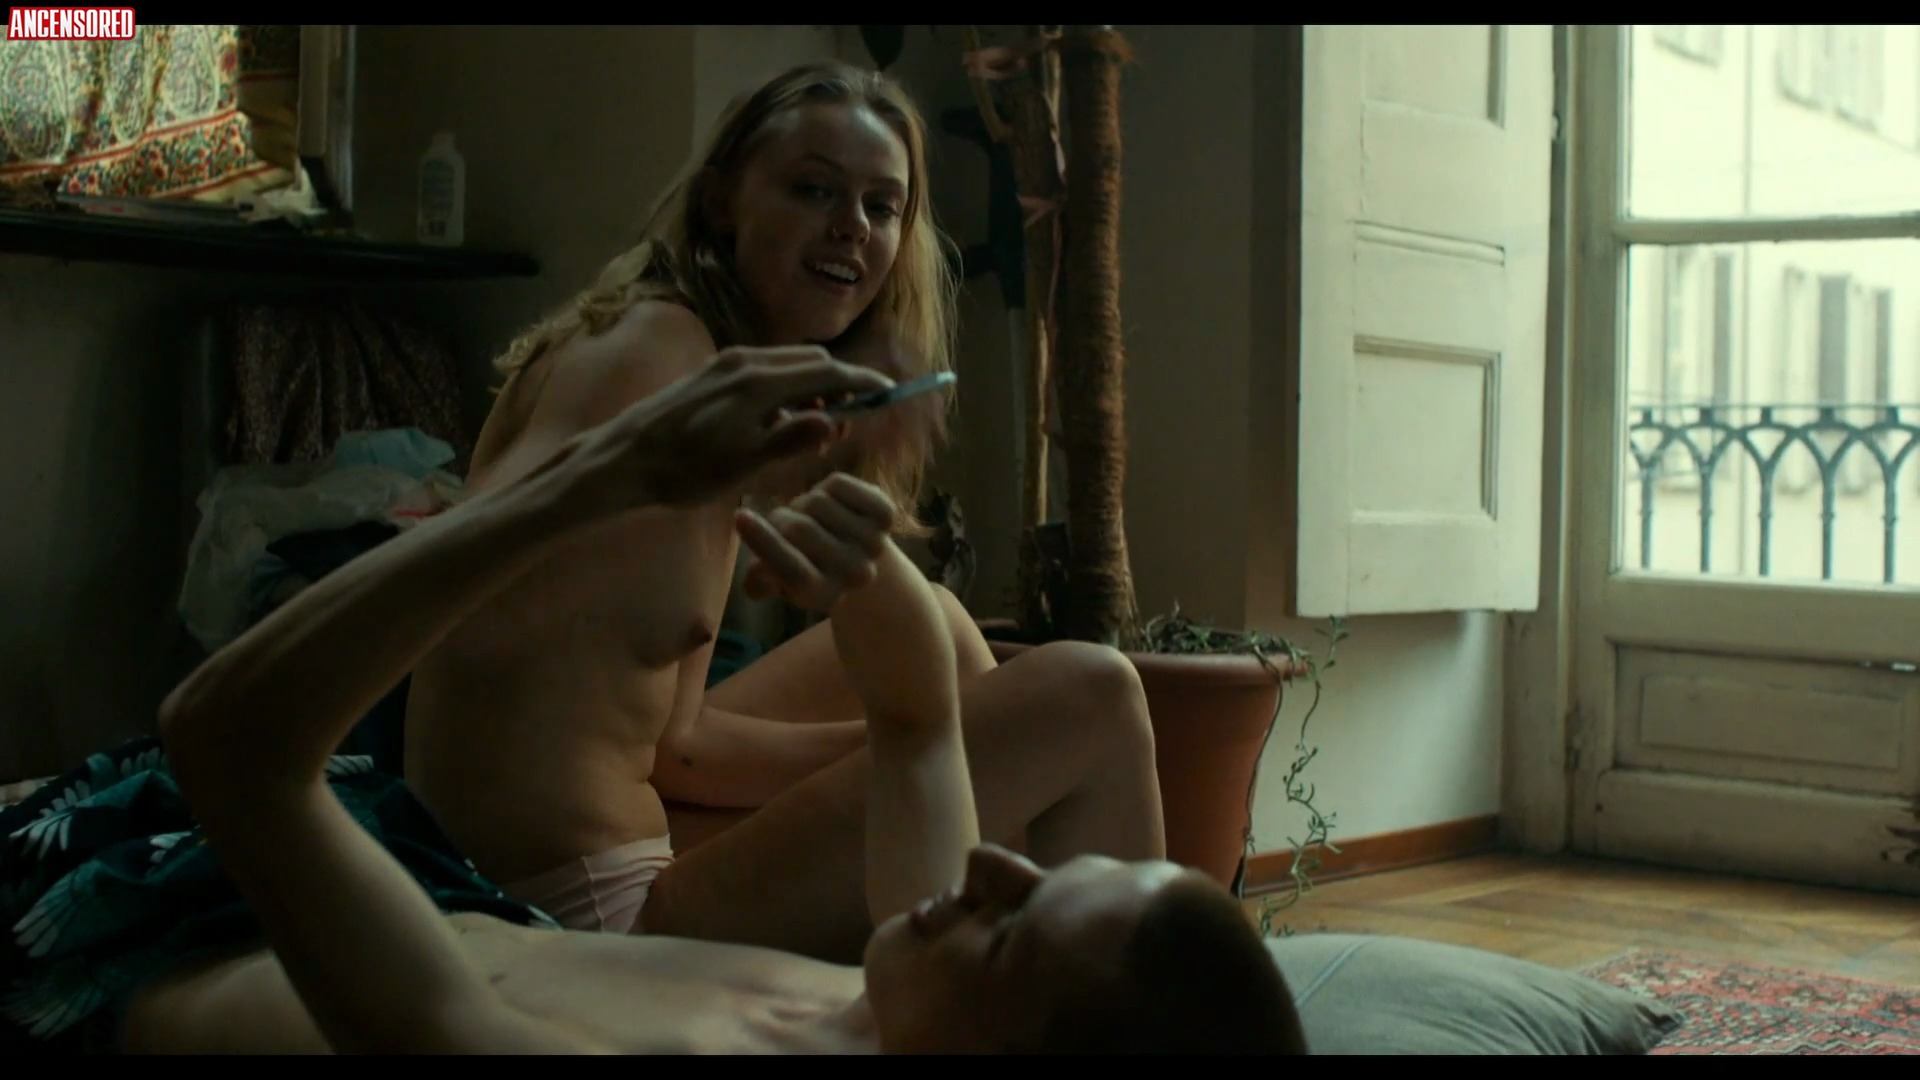 Naked Frida Gustavsson In Tigers